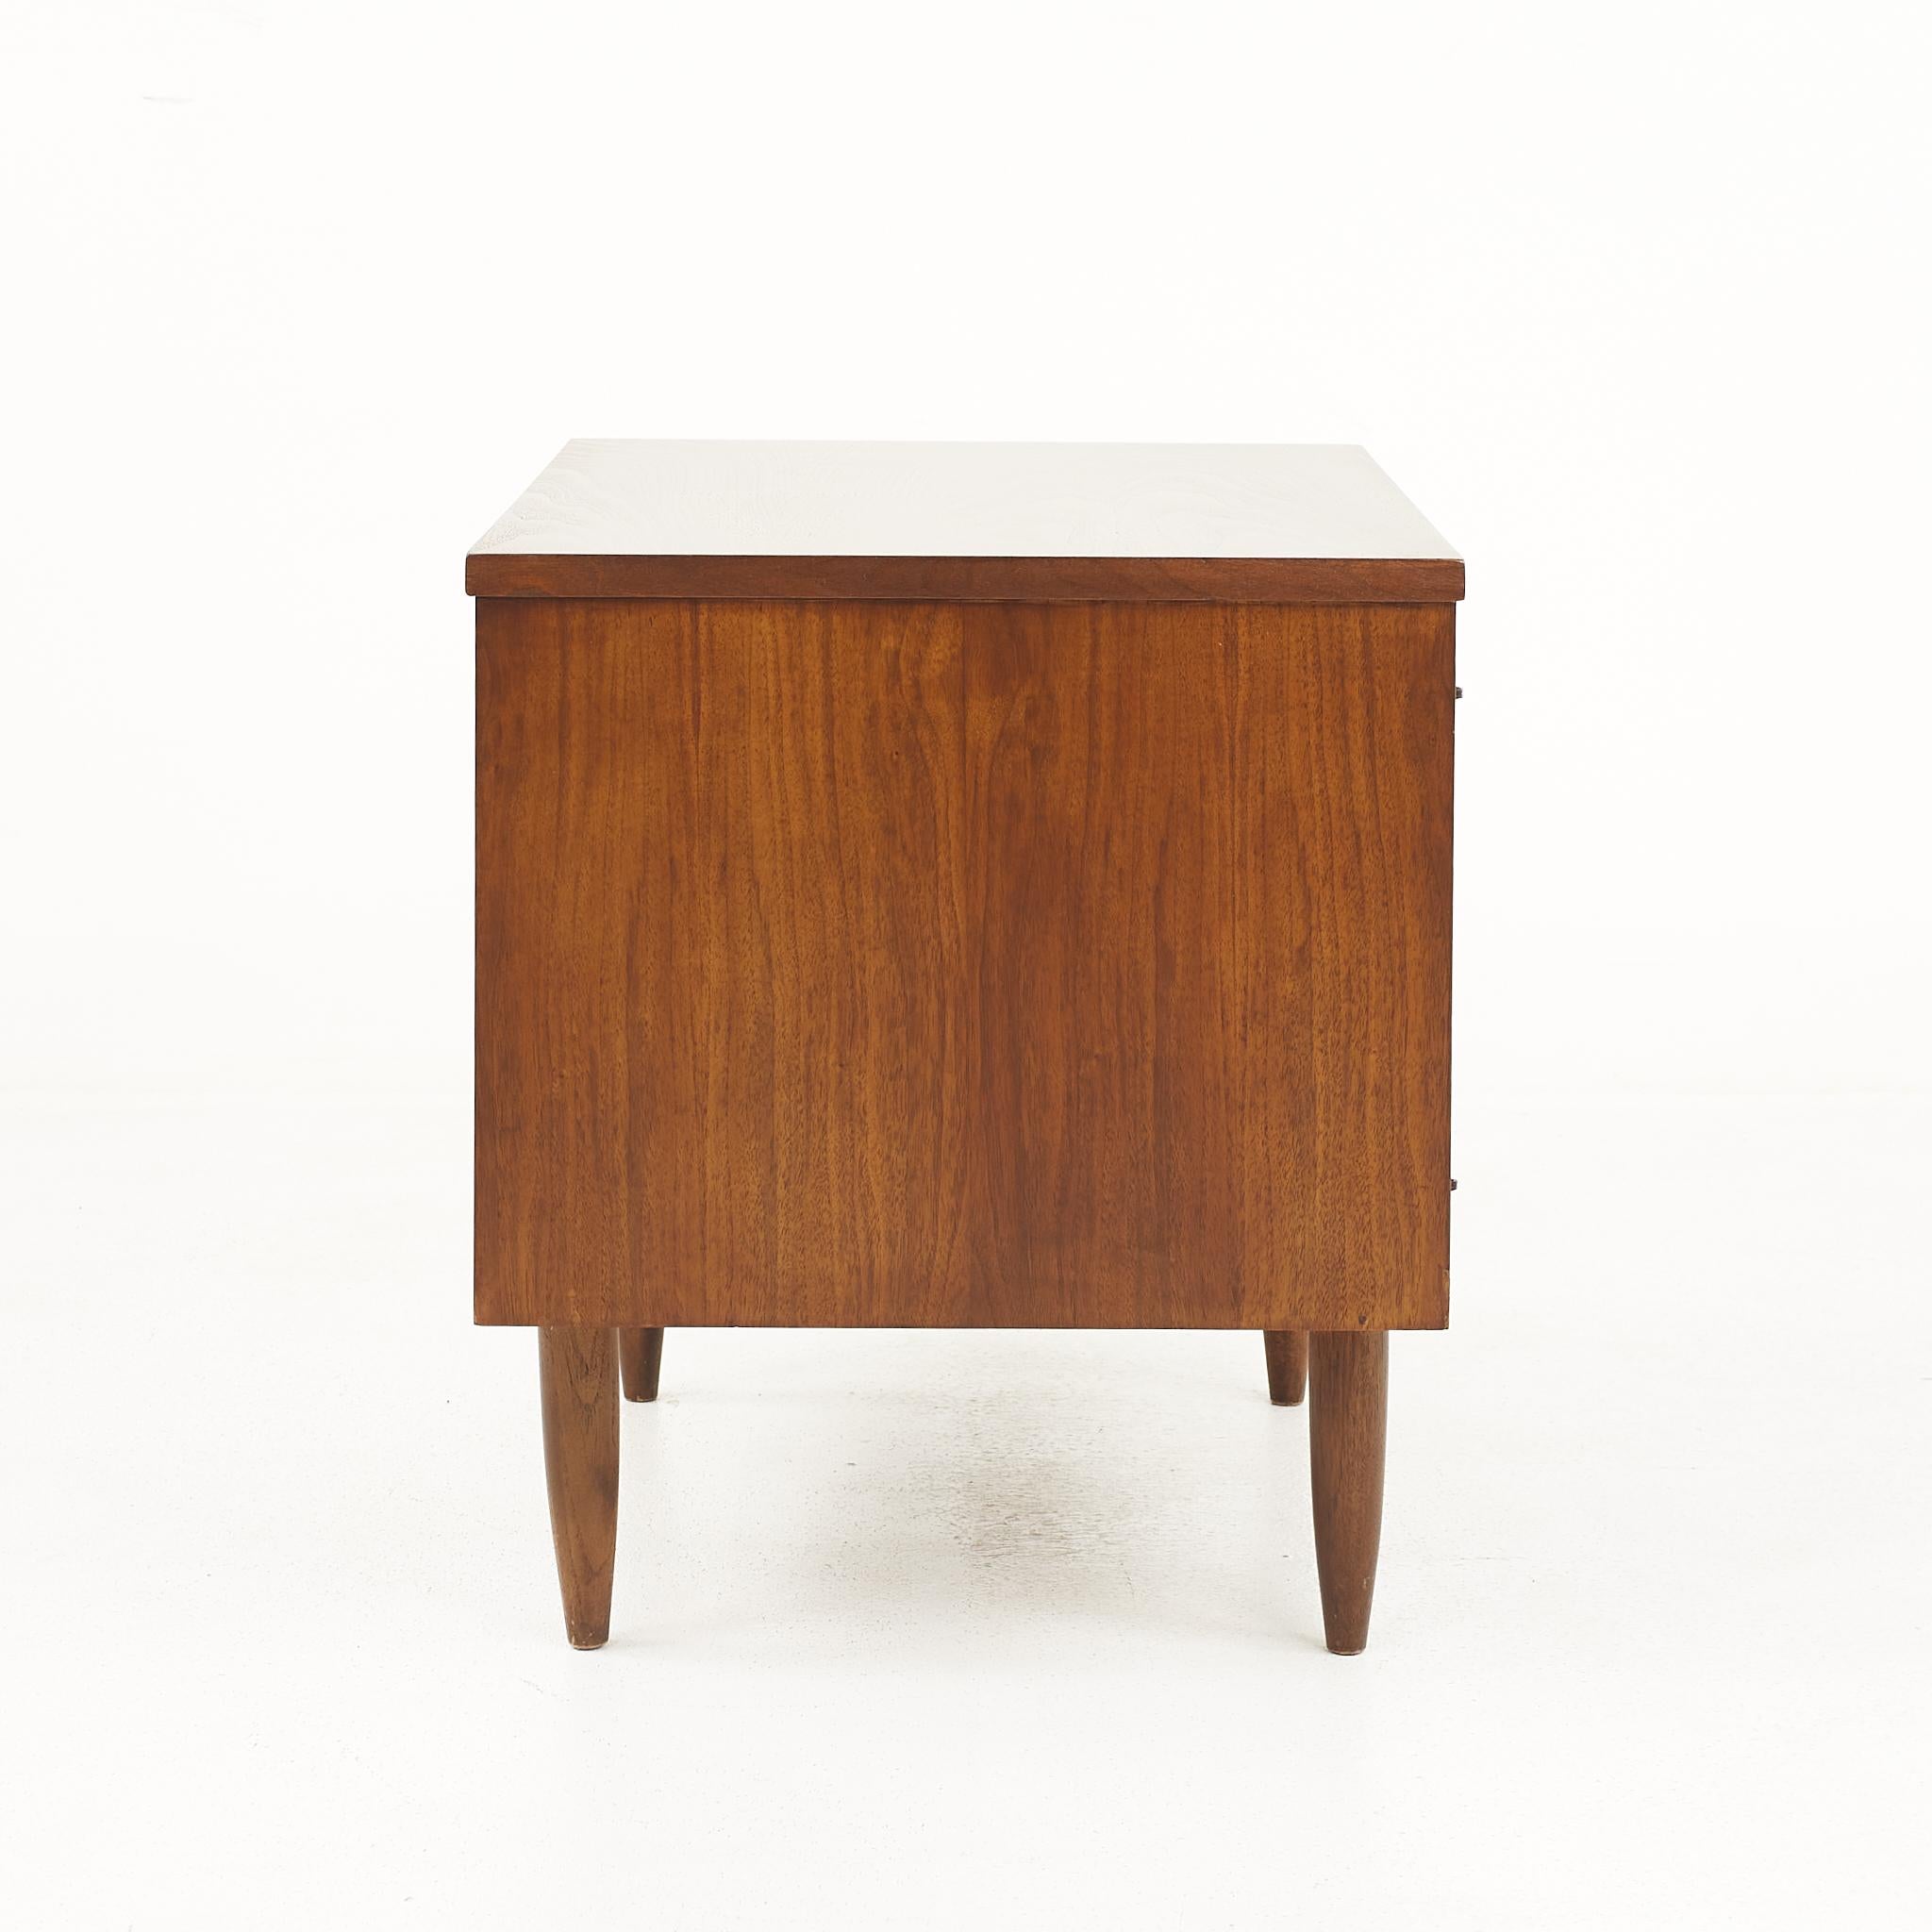 Wood Broyhill Sculptra Brutalist Mid-Century Walnut Commode Nightstands, a Pair For Sale